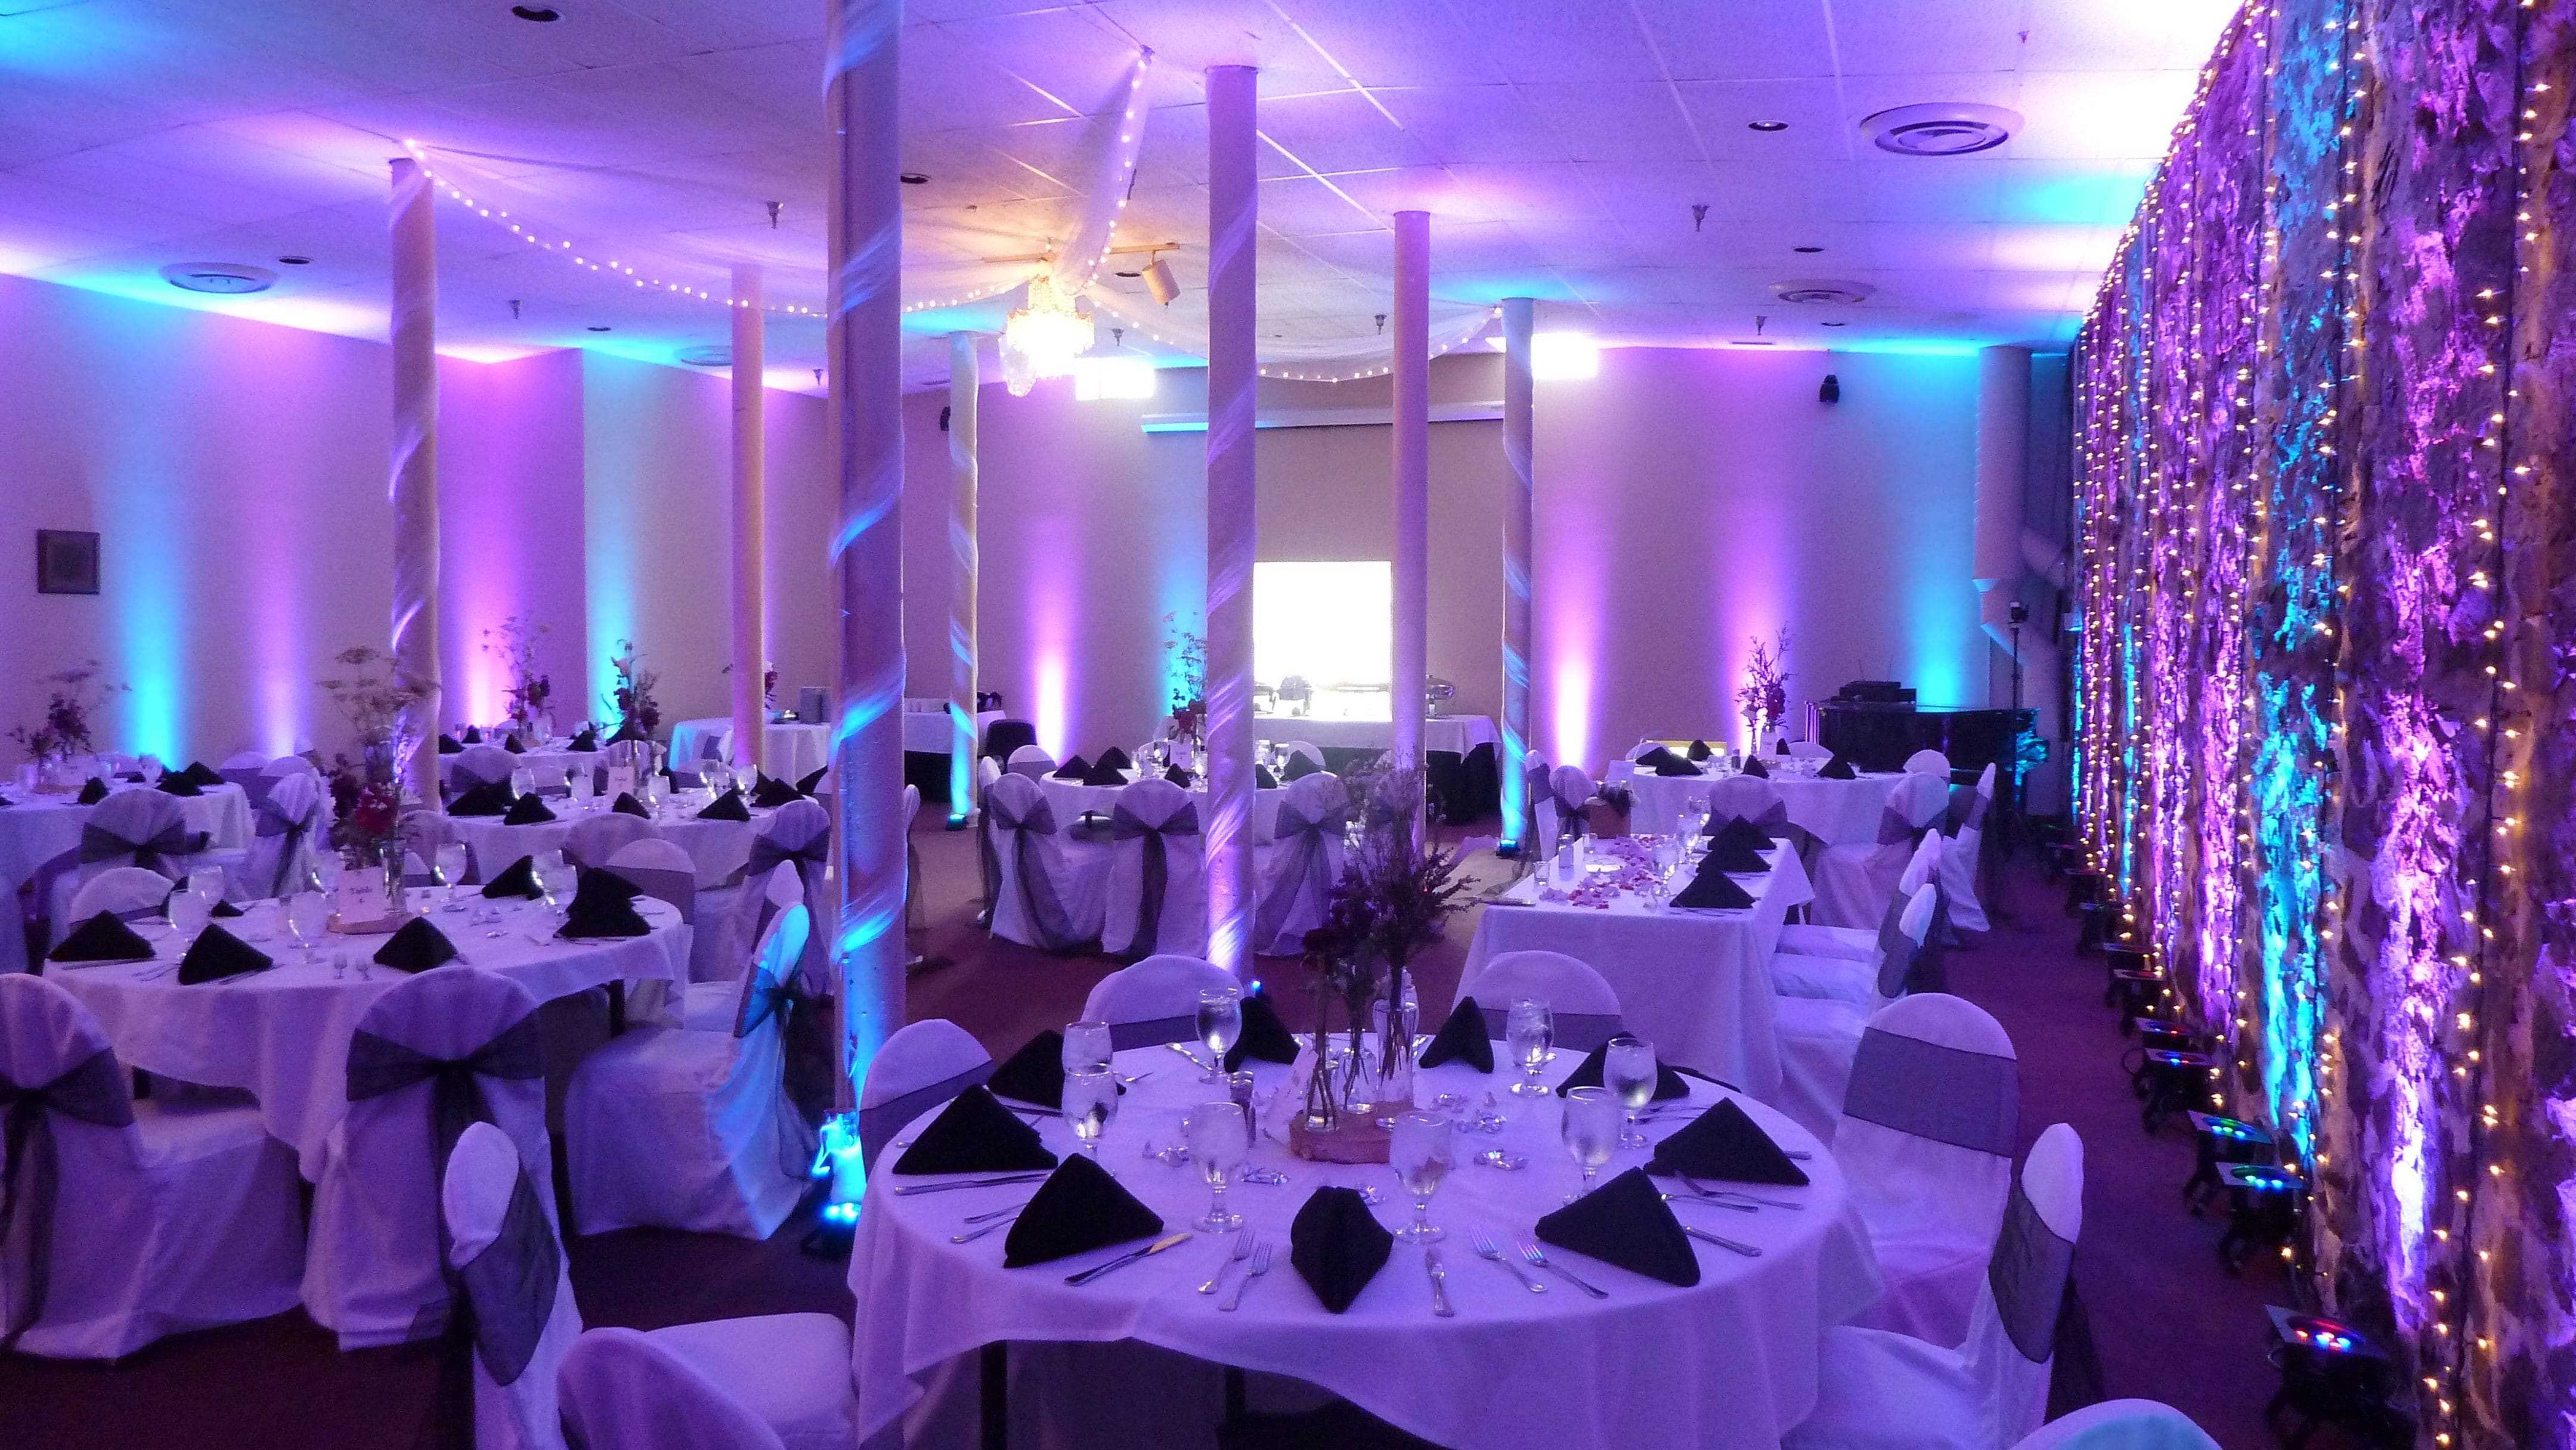 August Fitger room.
Up lighting in purple and teal.